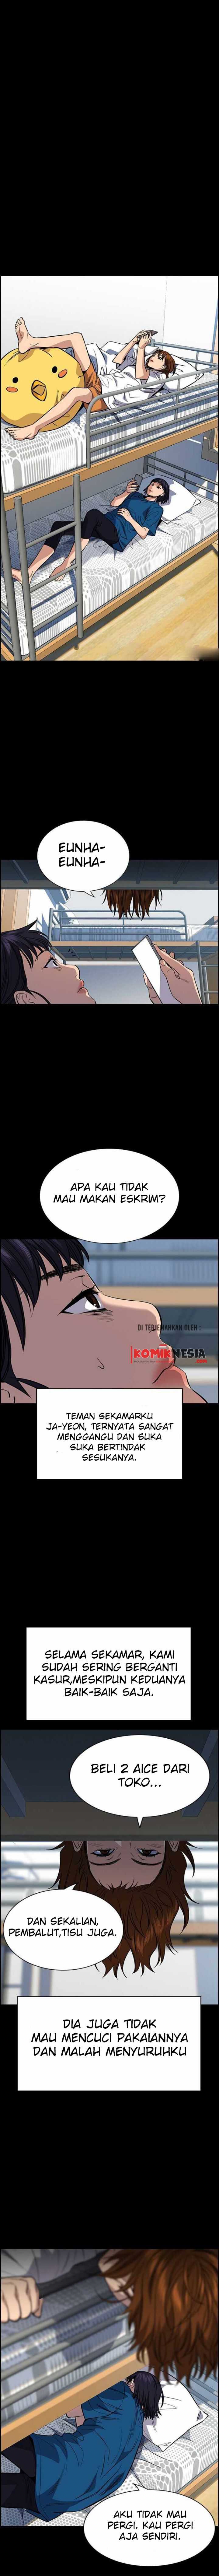 True Education Chapter 36 bahasa indonesia